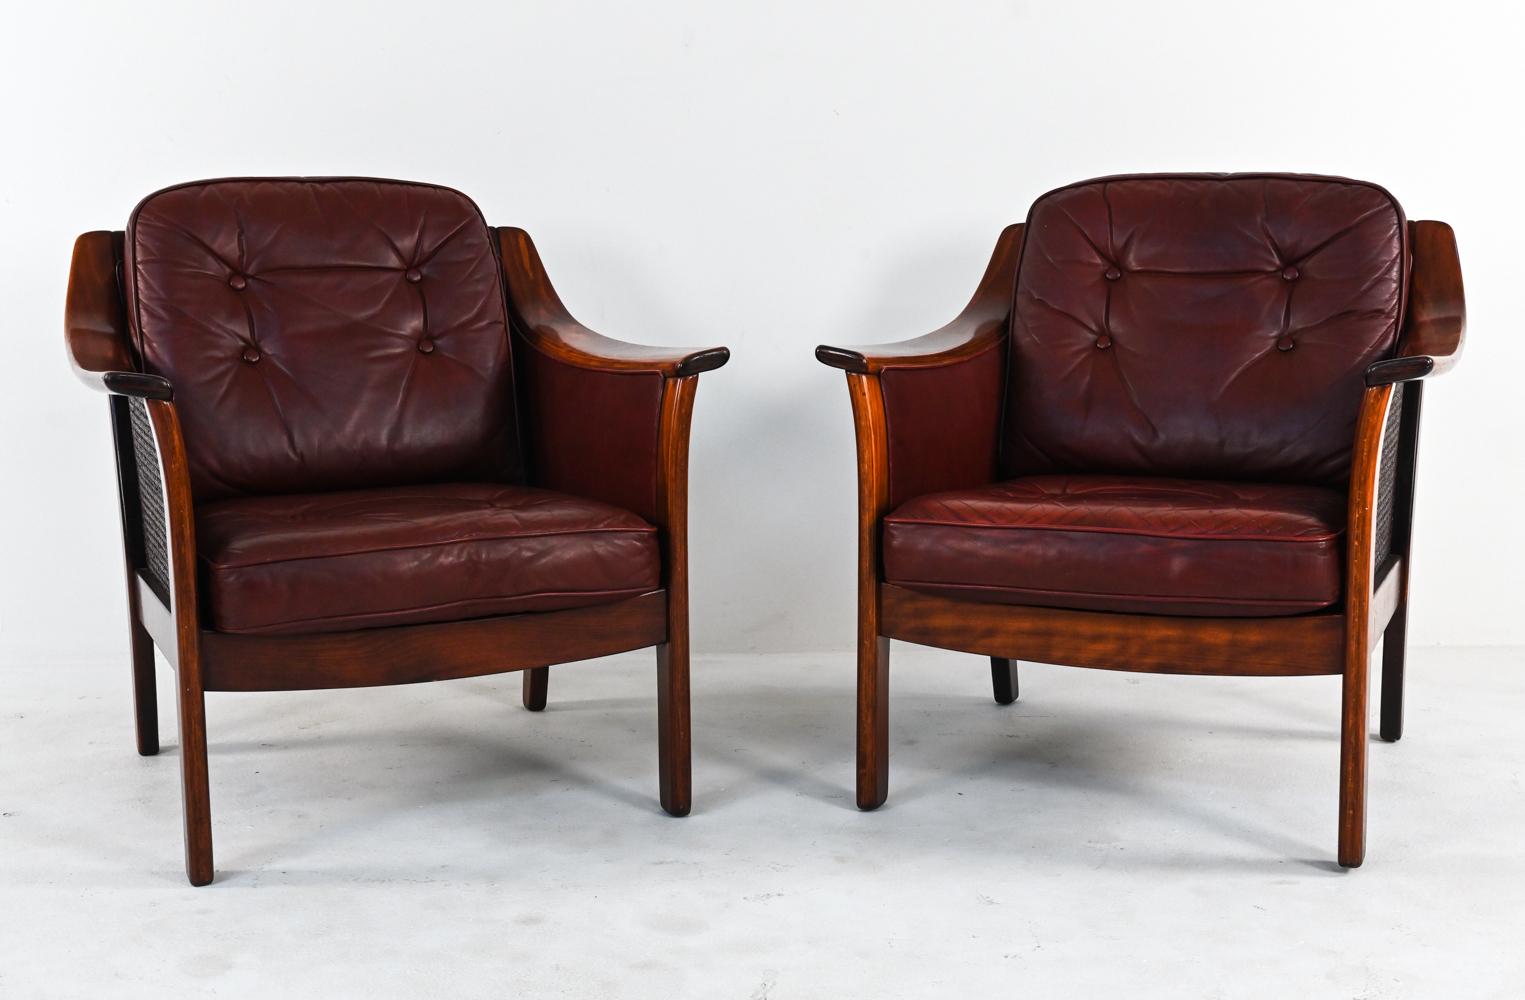 Norwegian Pair of Torbjorn Afdal for Bruksbo Leather & Caned Lounge Chairs